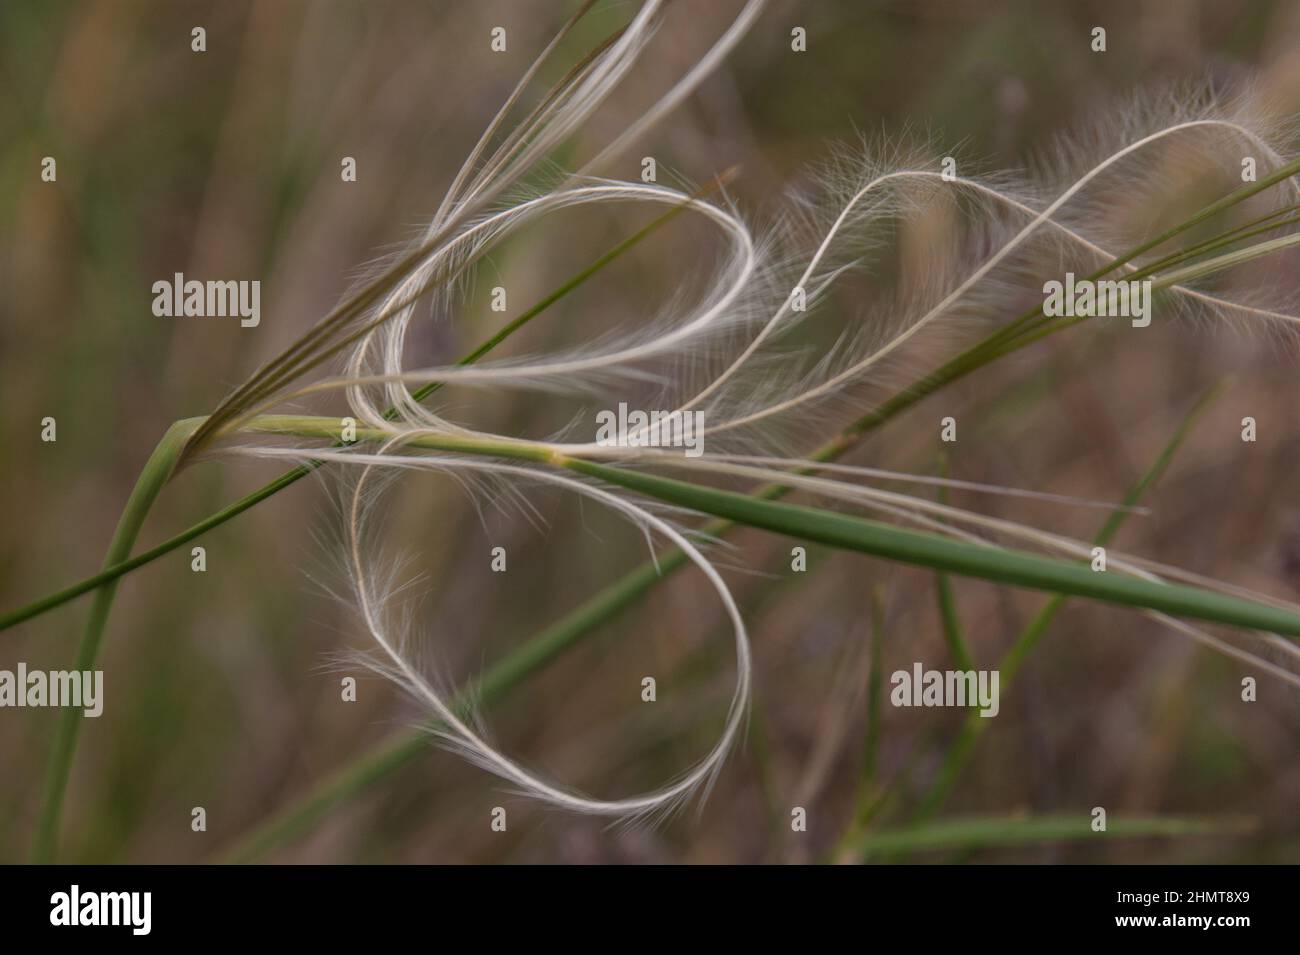 Closeup shot of the Stipa Pennata feather grass on the blurry background Stock Photo